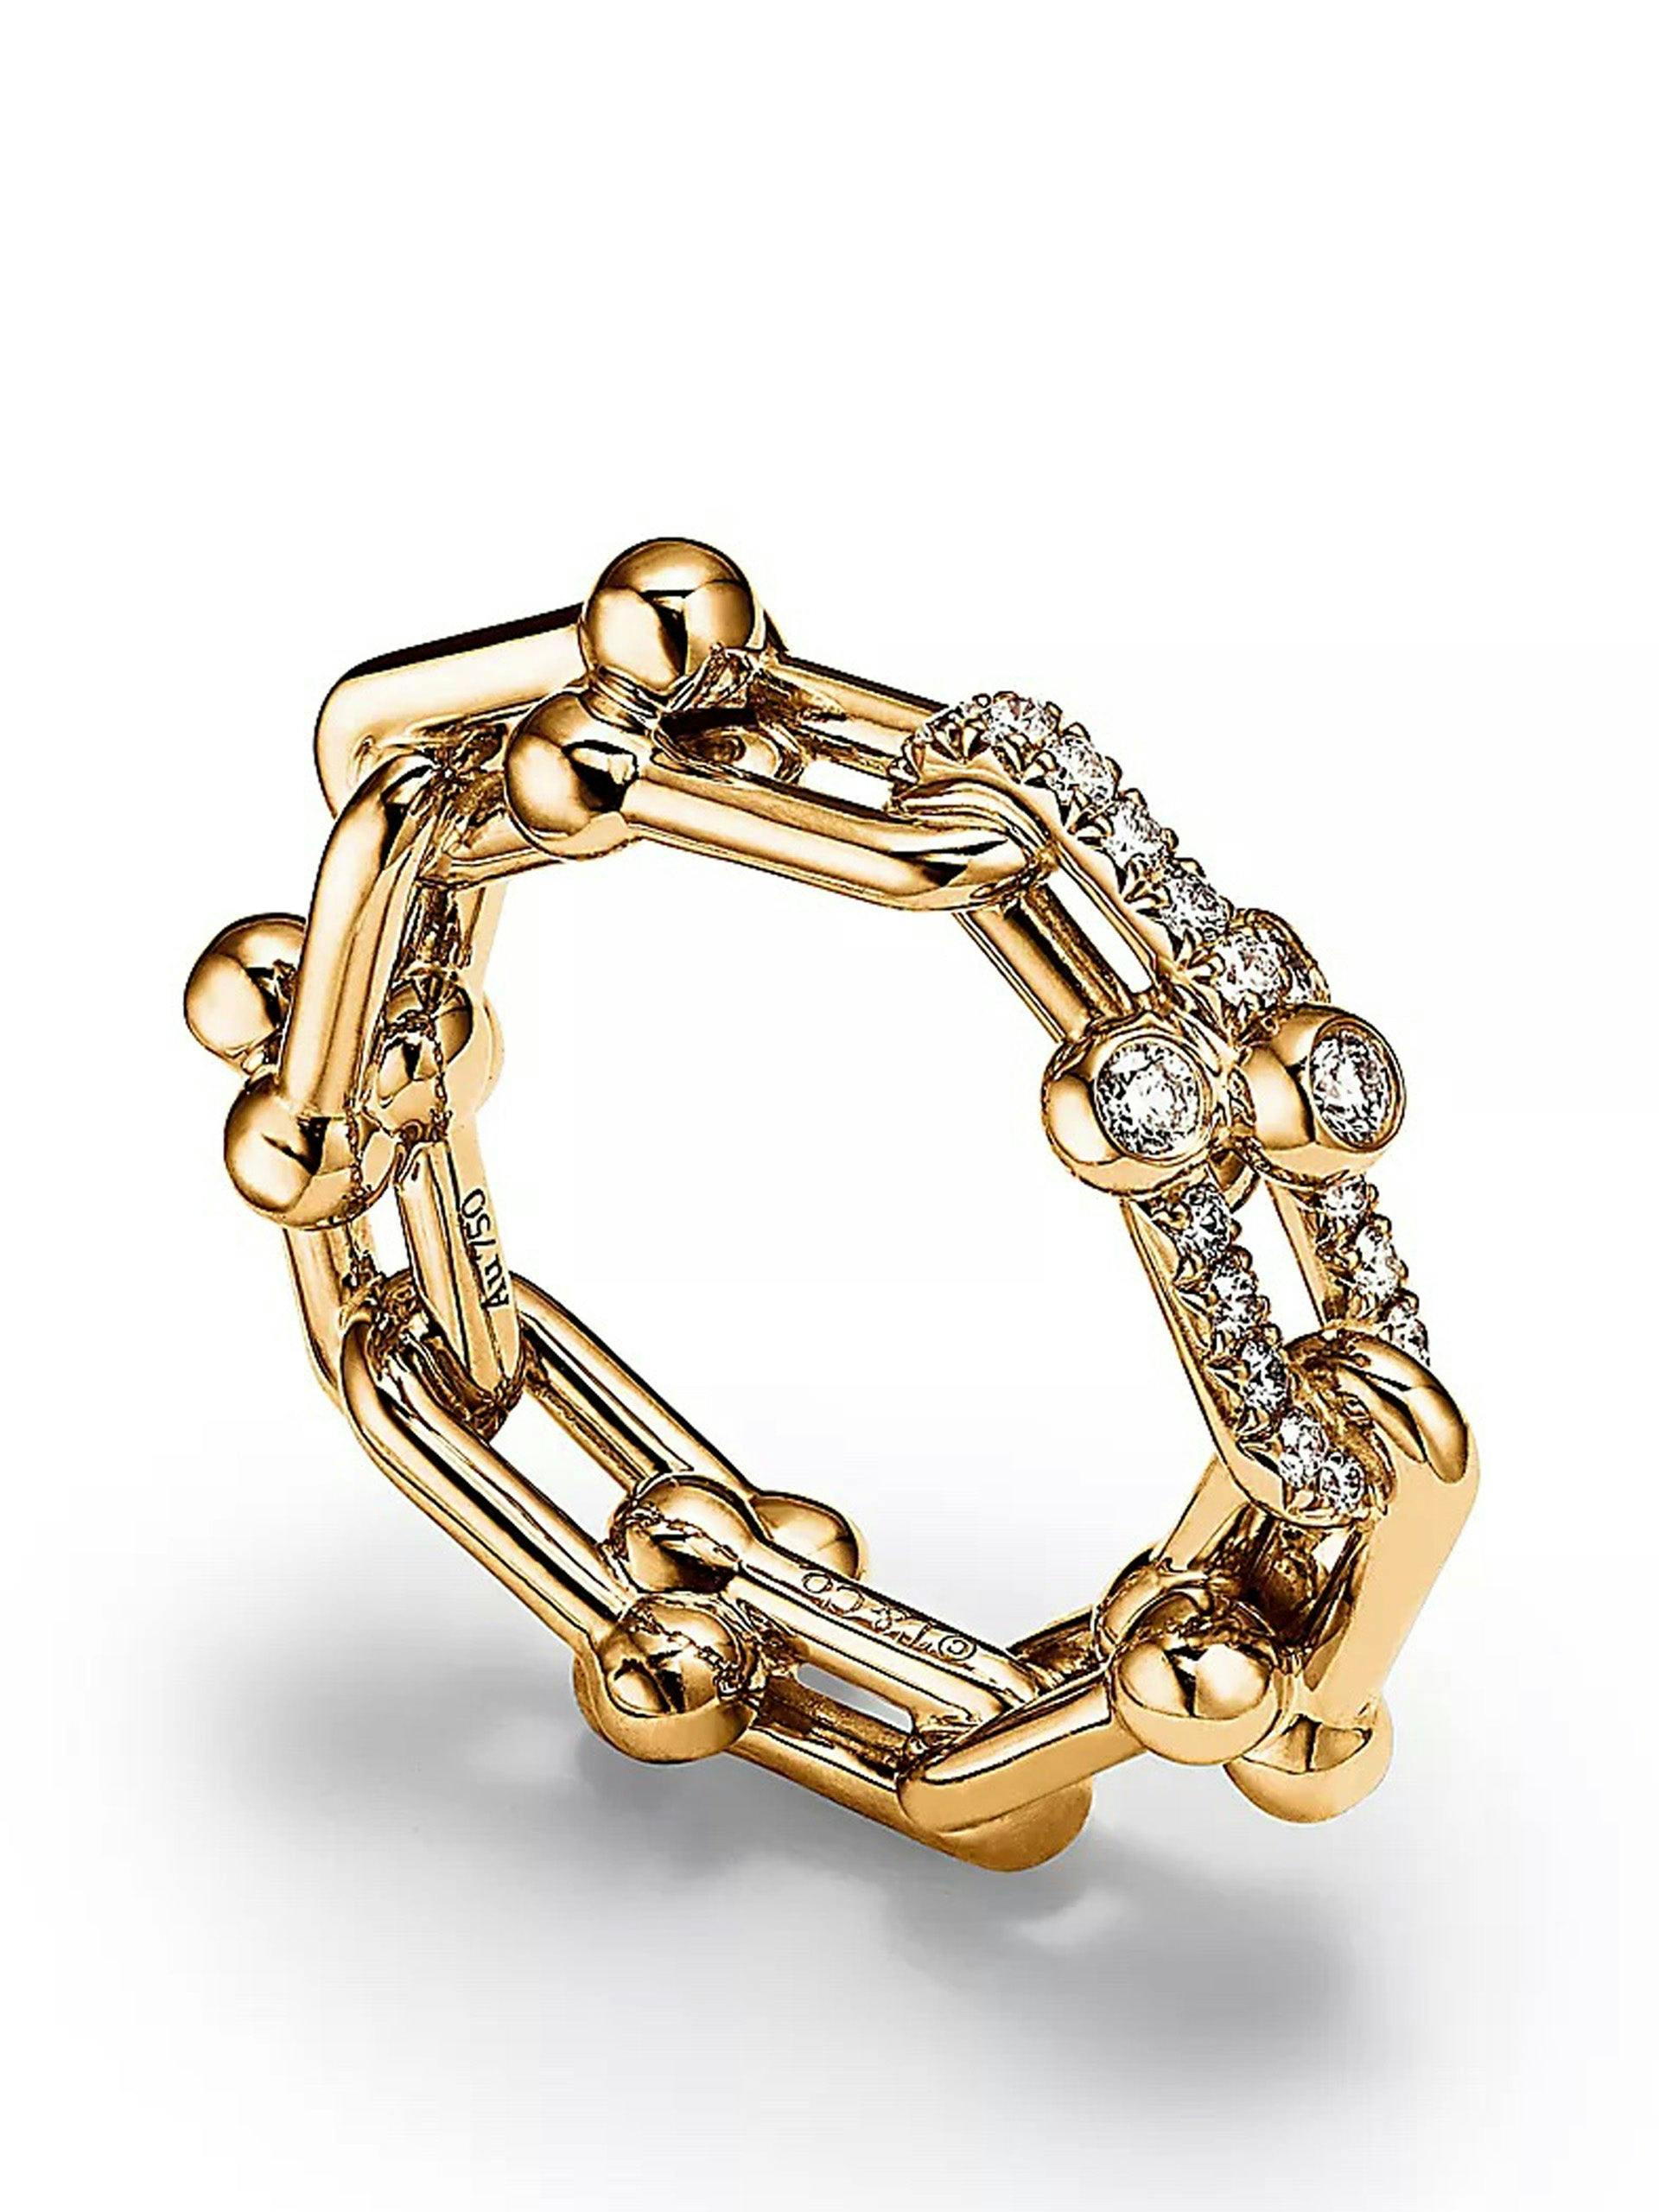 Tiffany Hardware gold and diamond small link ring